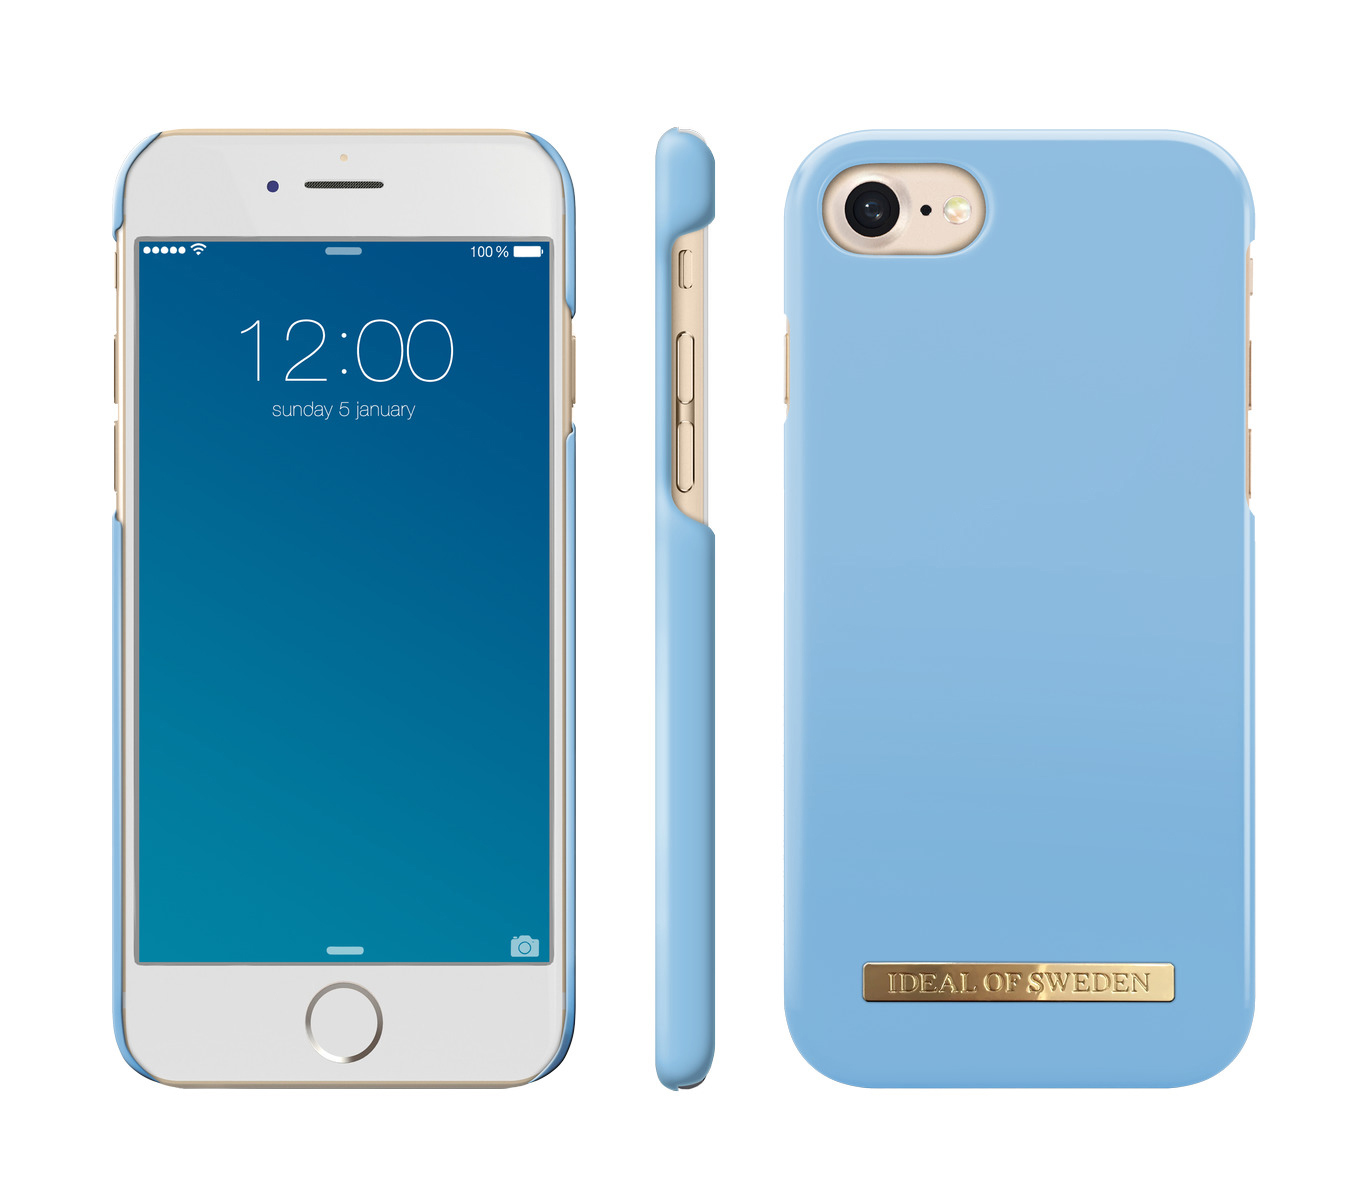 Blue iPhone OF IDEAL Airy iPhone iPhone Fashion, Backcover, SWEDEN 8, 6, 7, Apple,